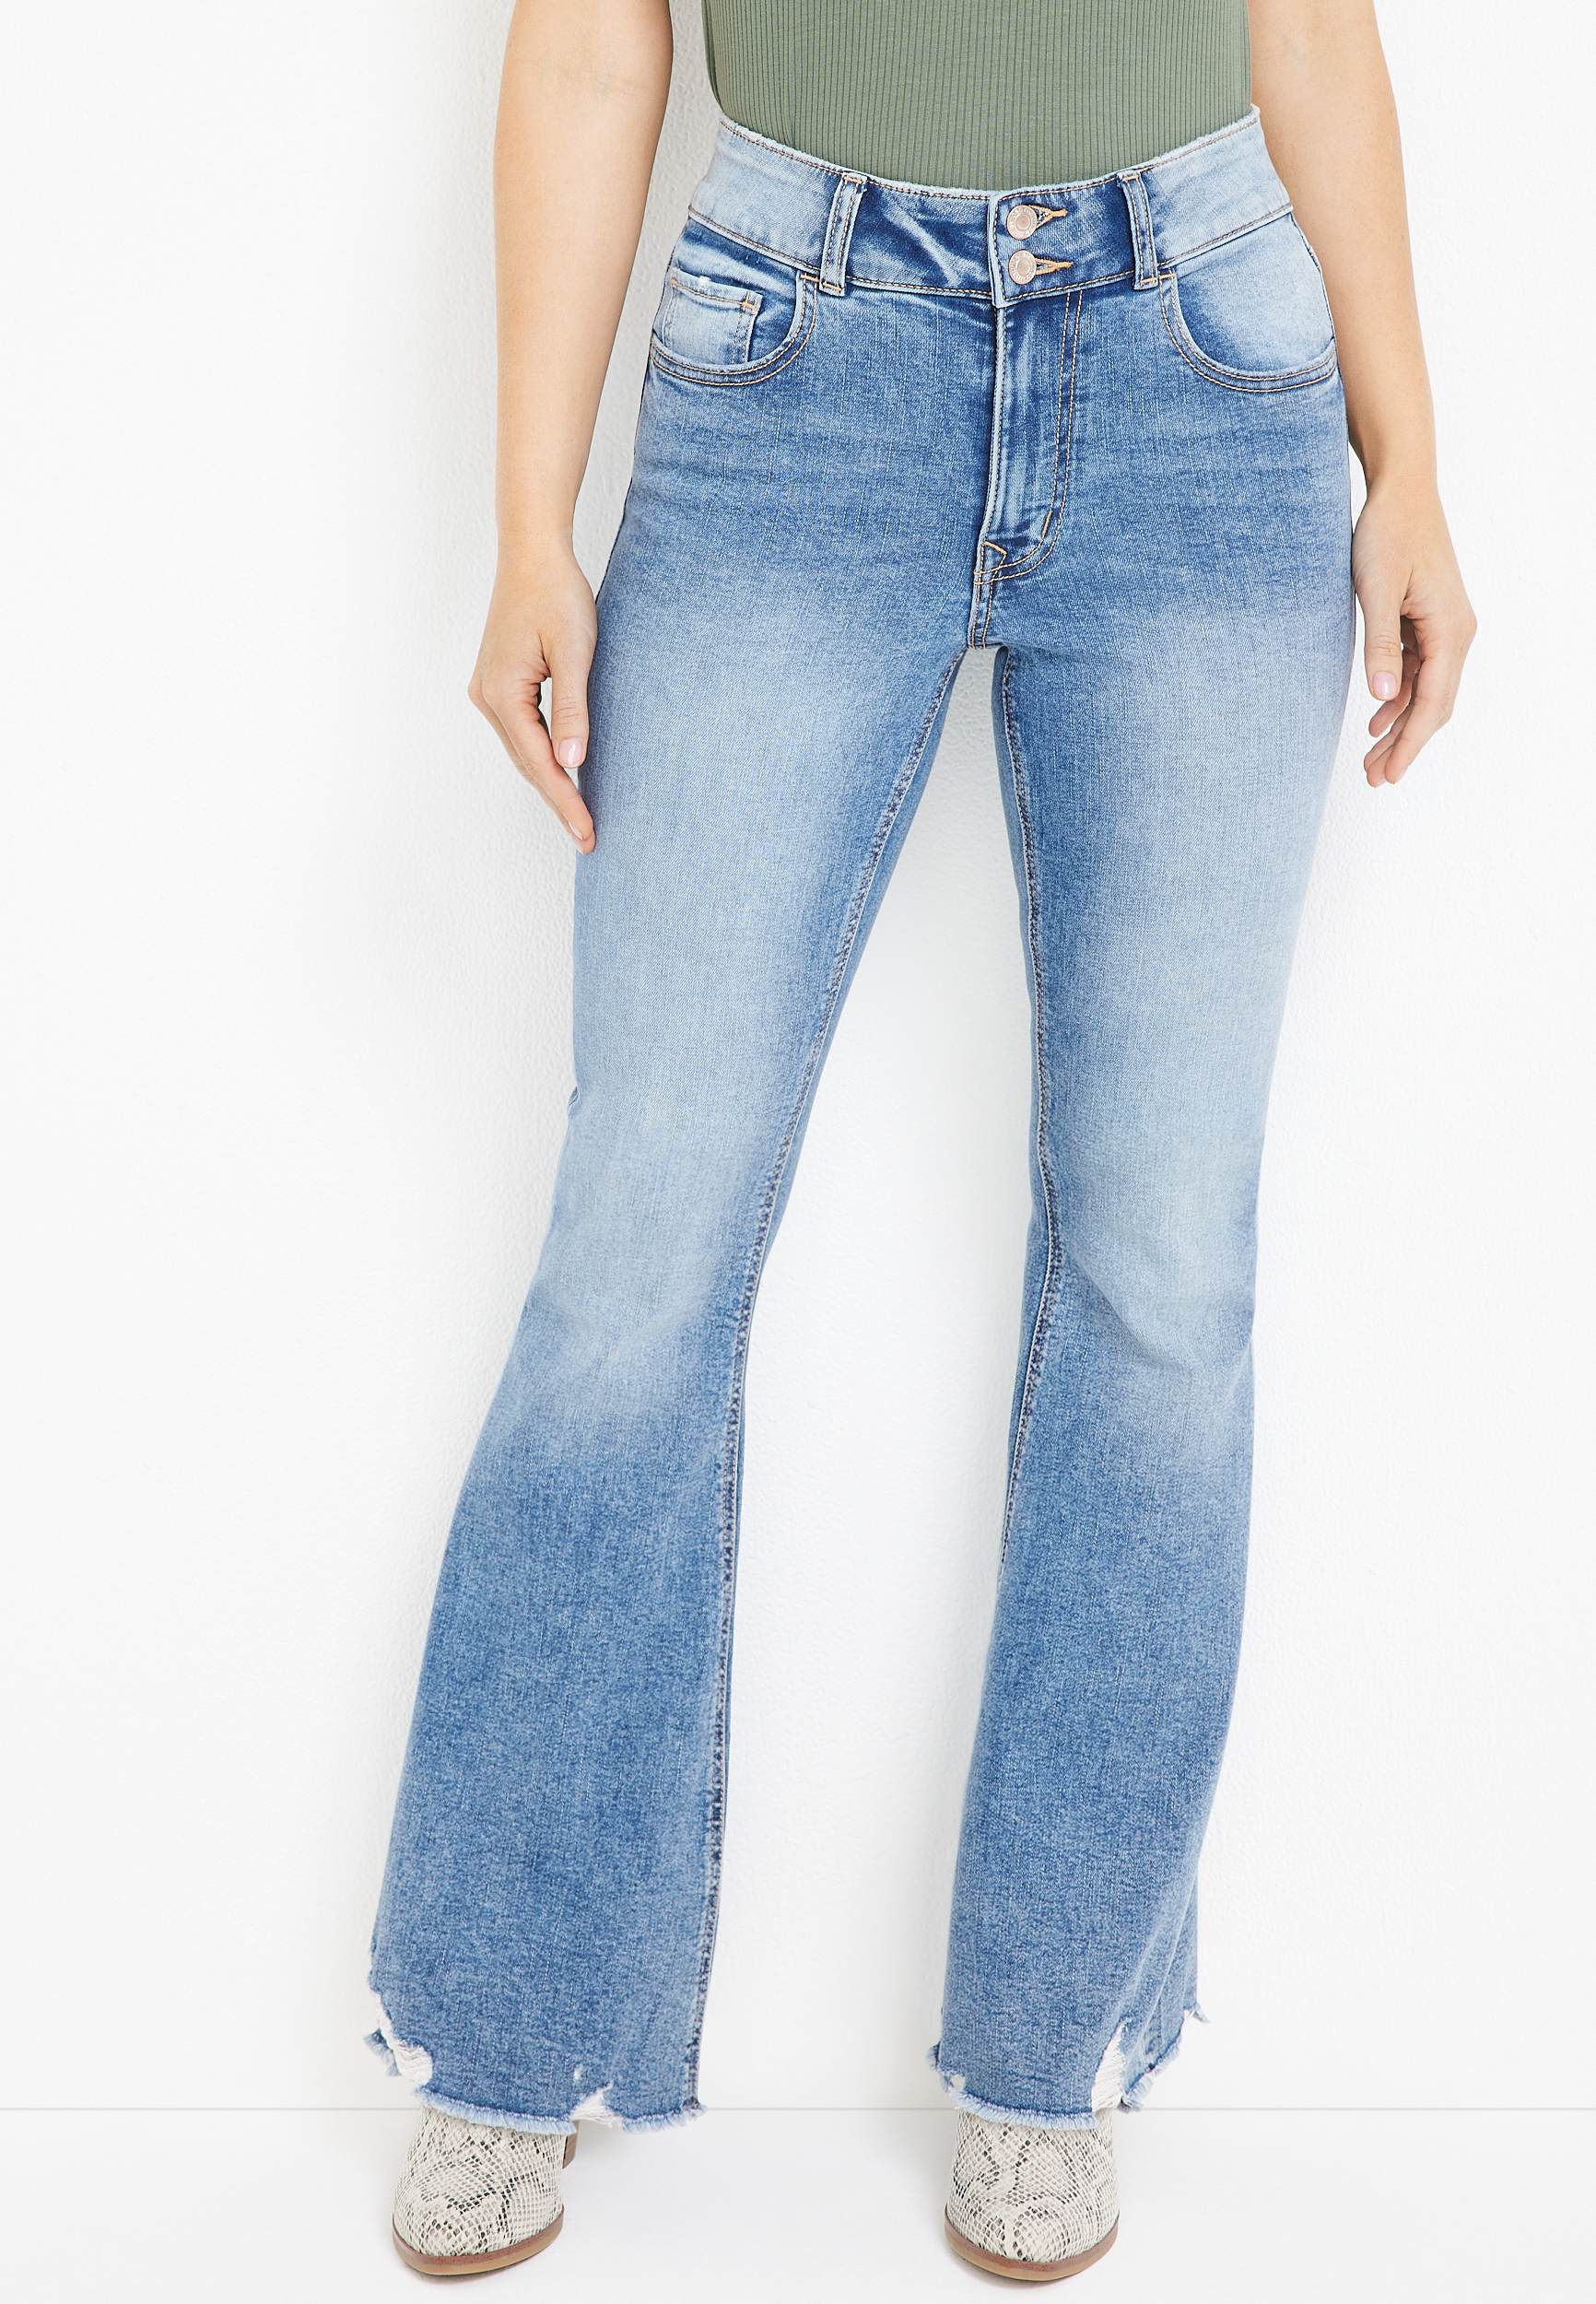 m jeans by maurices™ Flare Cool Comfort High Rise Ripped Hem Jean